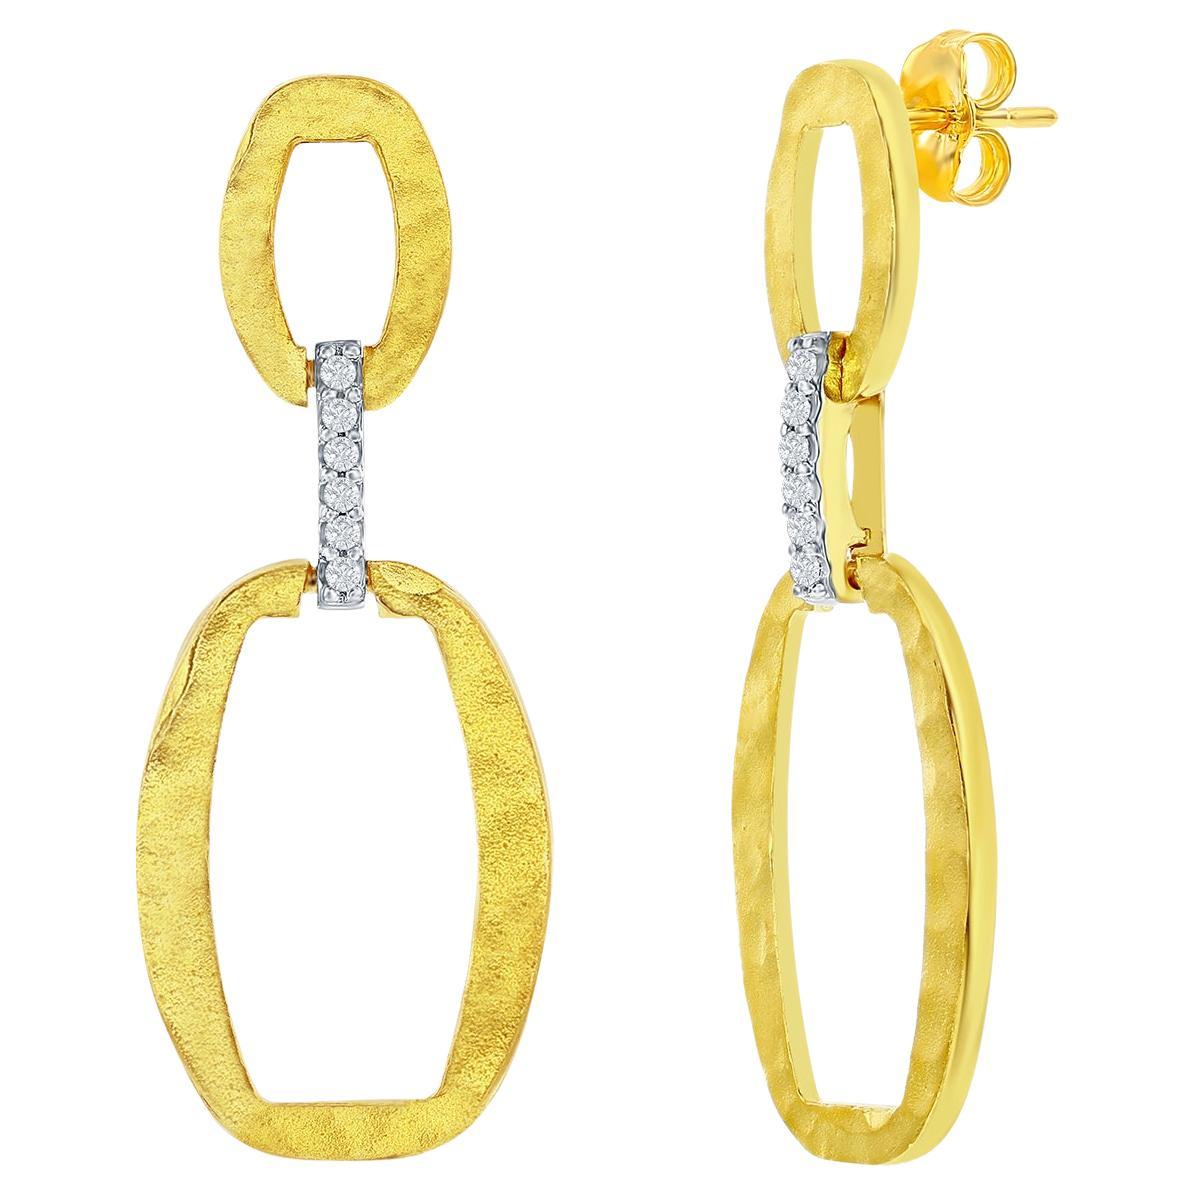 Hand-Crafted 14K Yellow Gold Dangling Open Ellipse Link Earrings